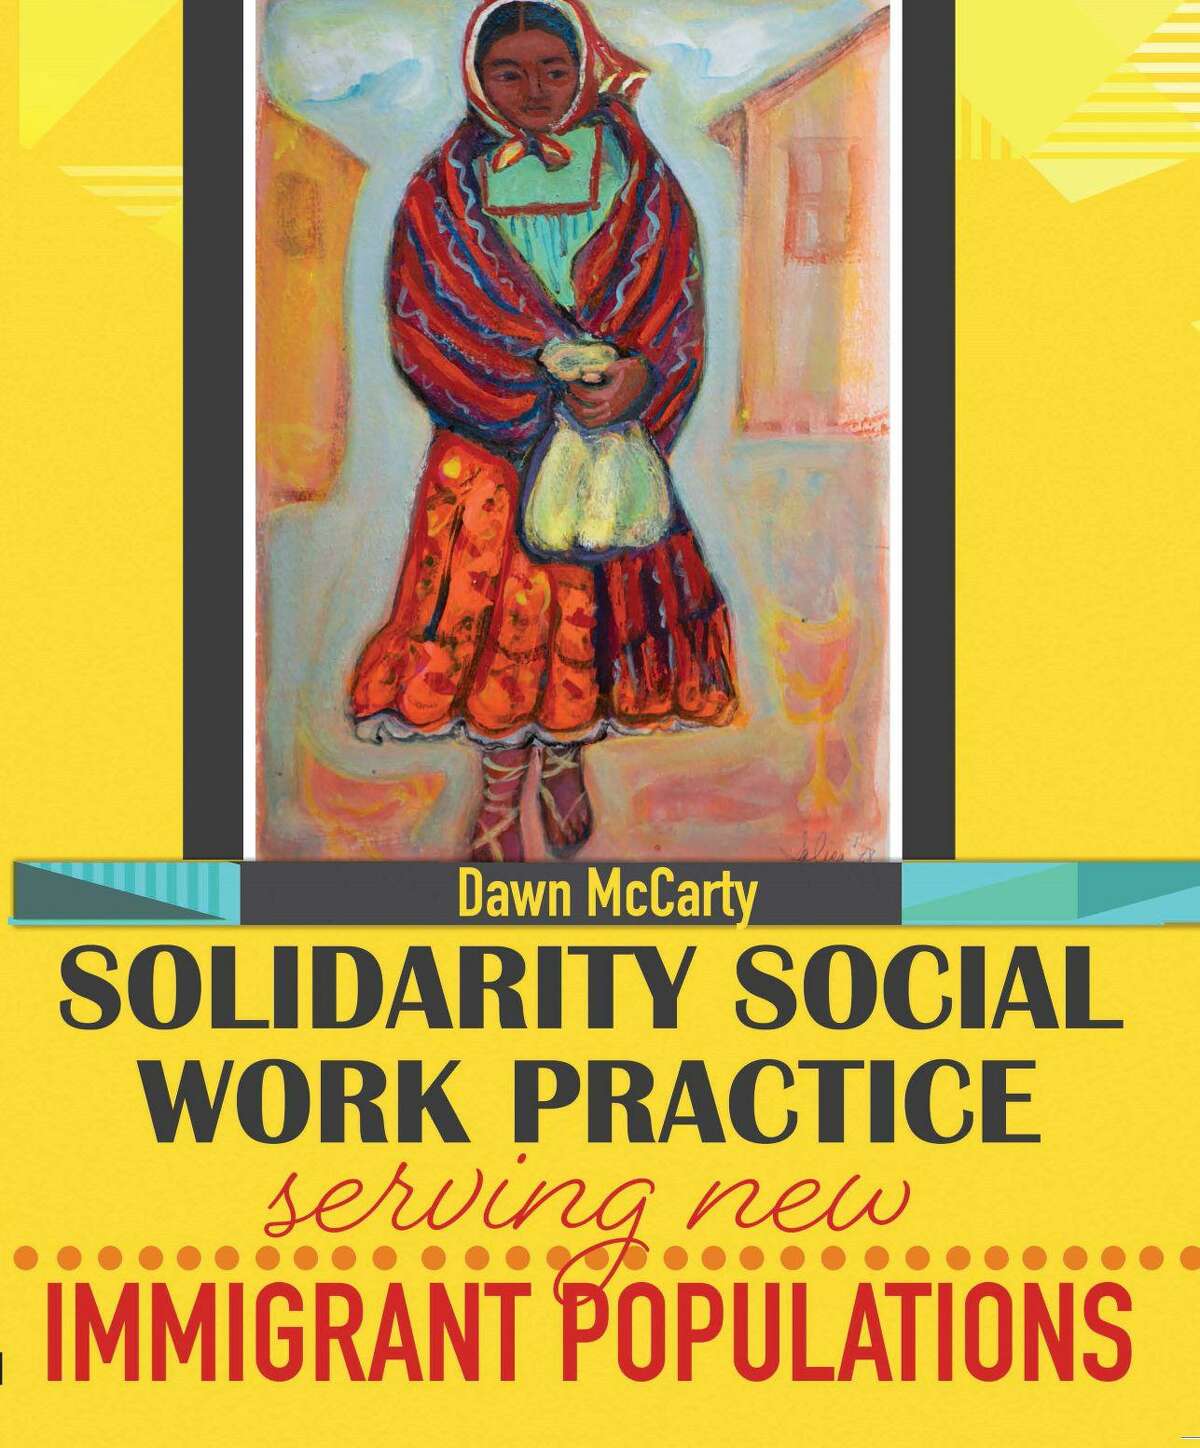 Dawn McCarty, associate professor of social work at the University of Houston-Downtown, has published the new textbook “Solidarity Social Work Practice: Serving New Immigrant Populations.”